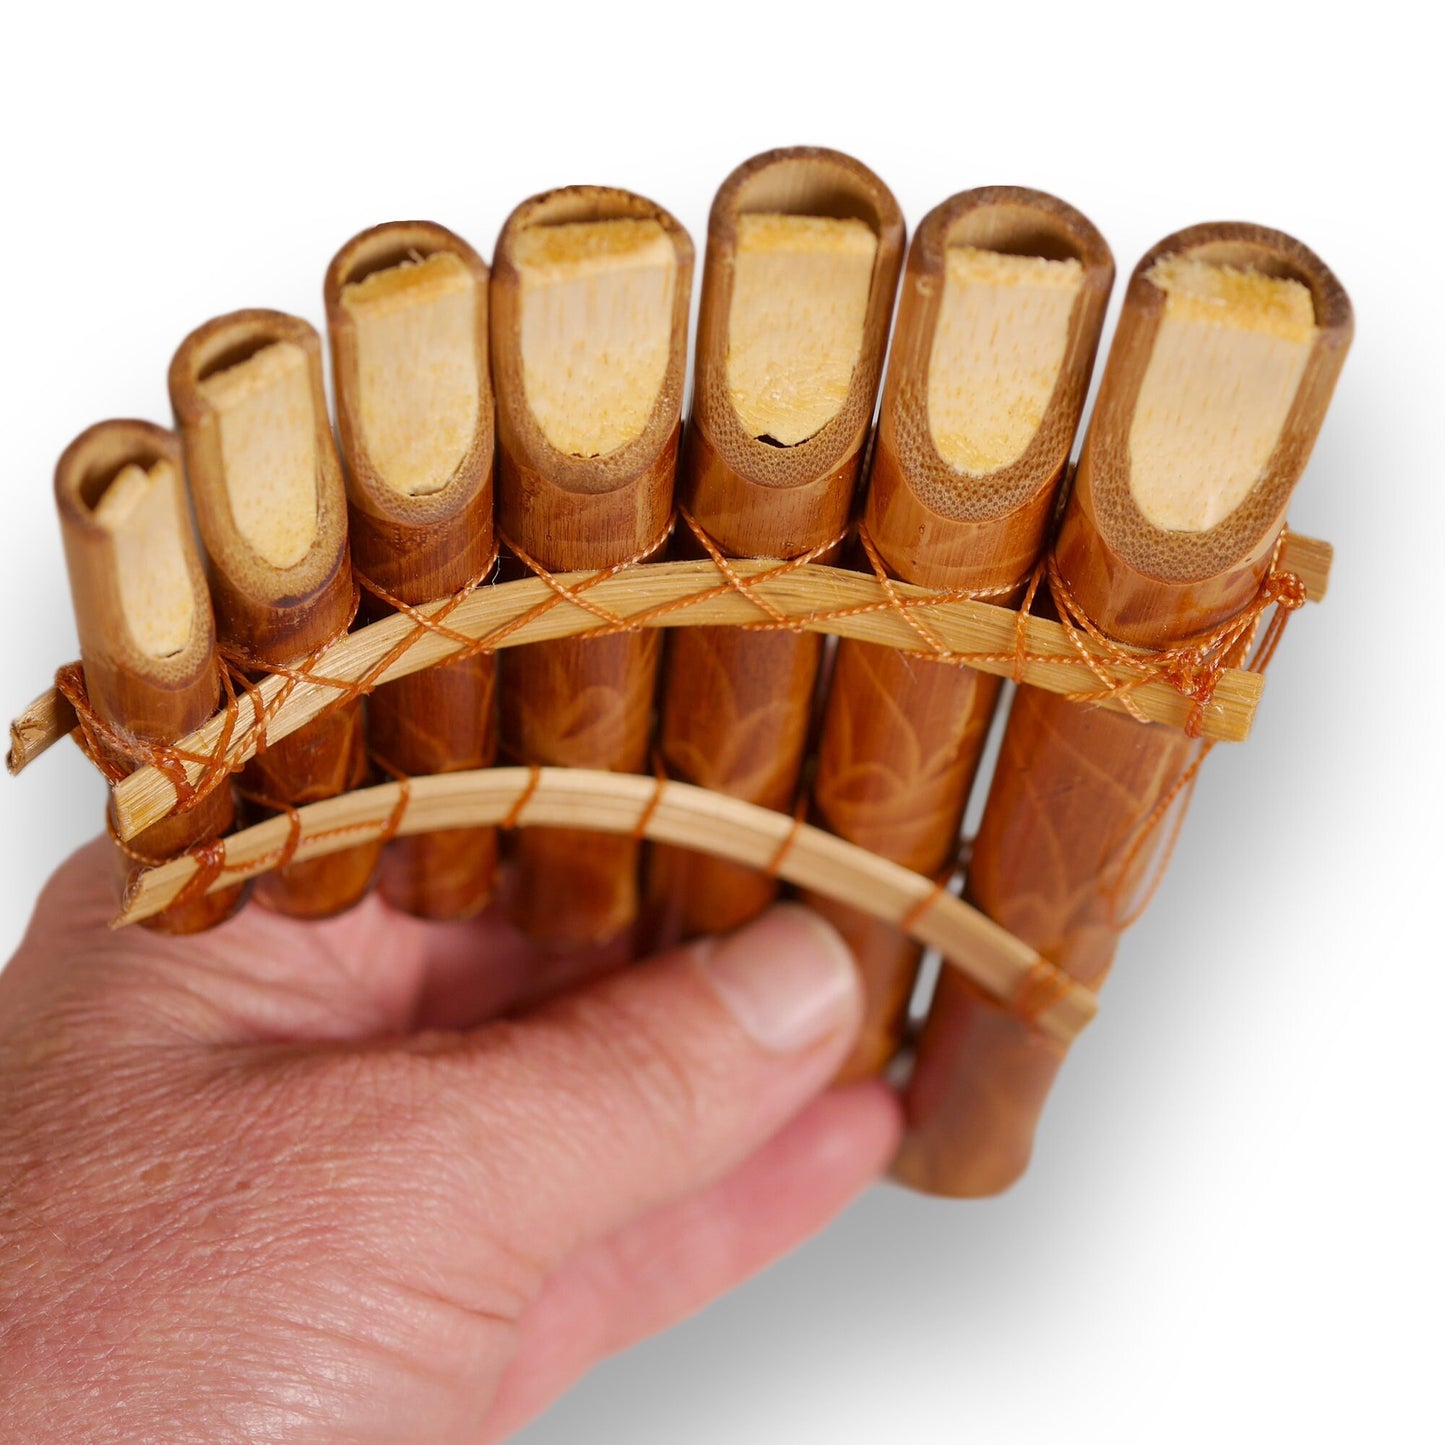 Pan flute bamboo flute with 7 tubes made of bamboo